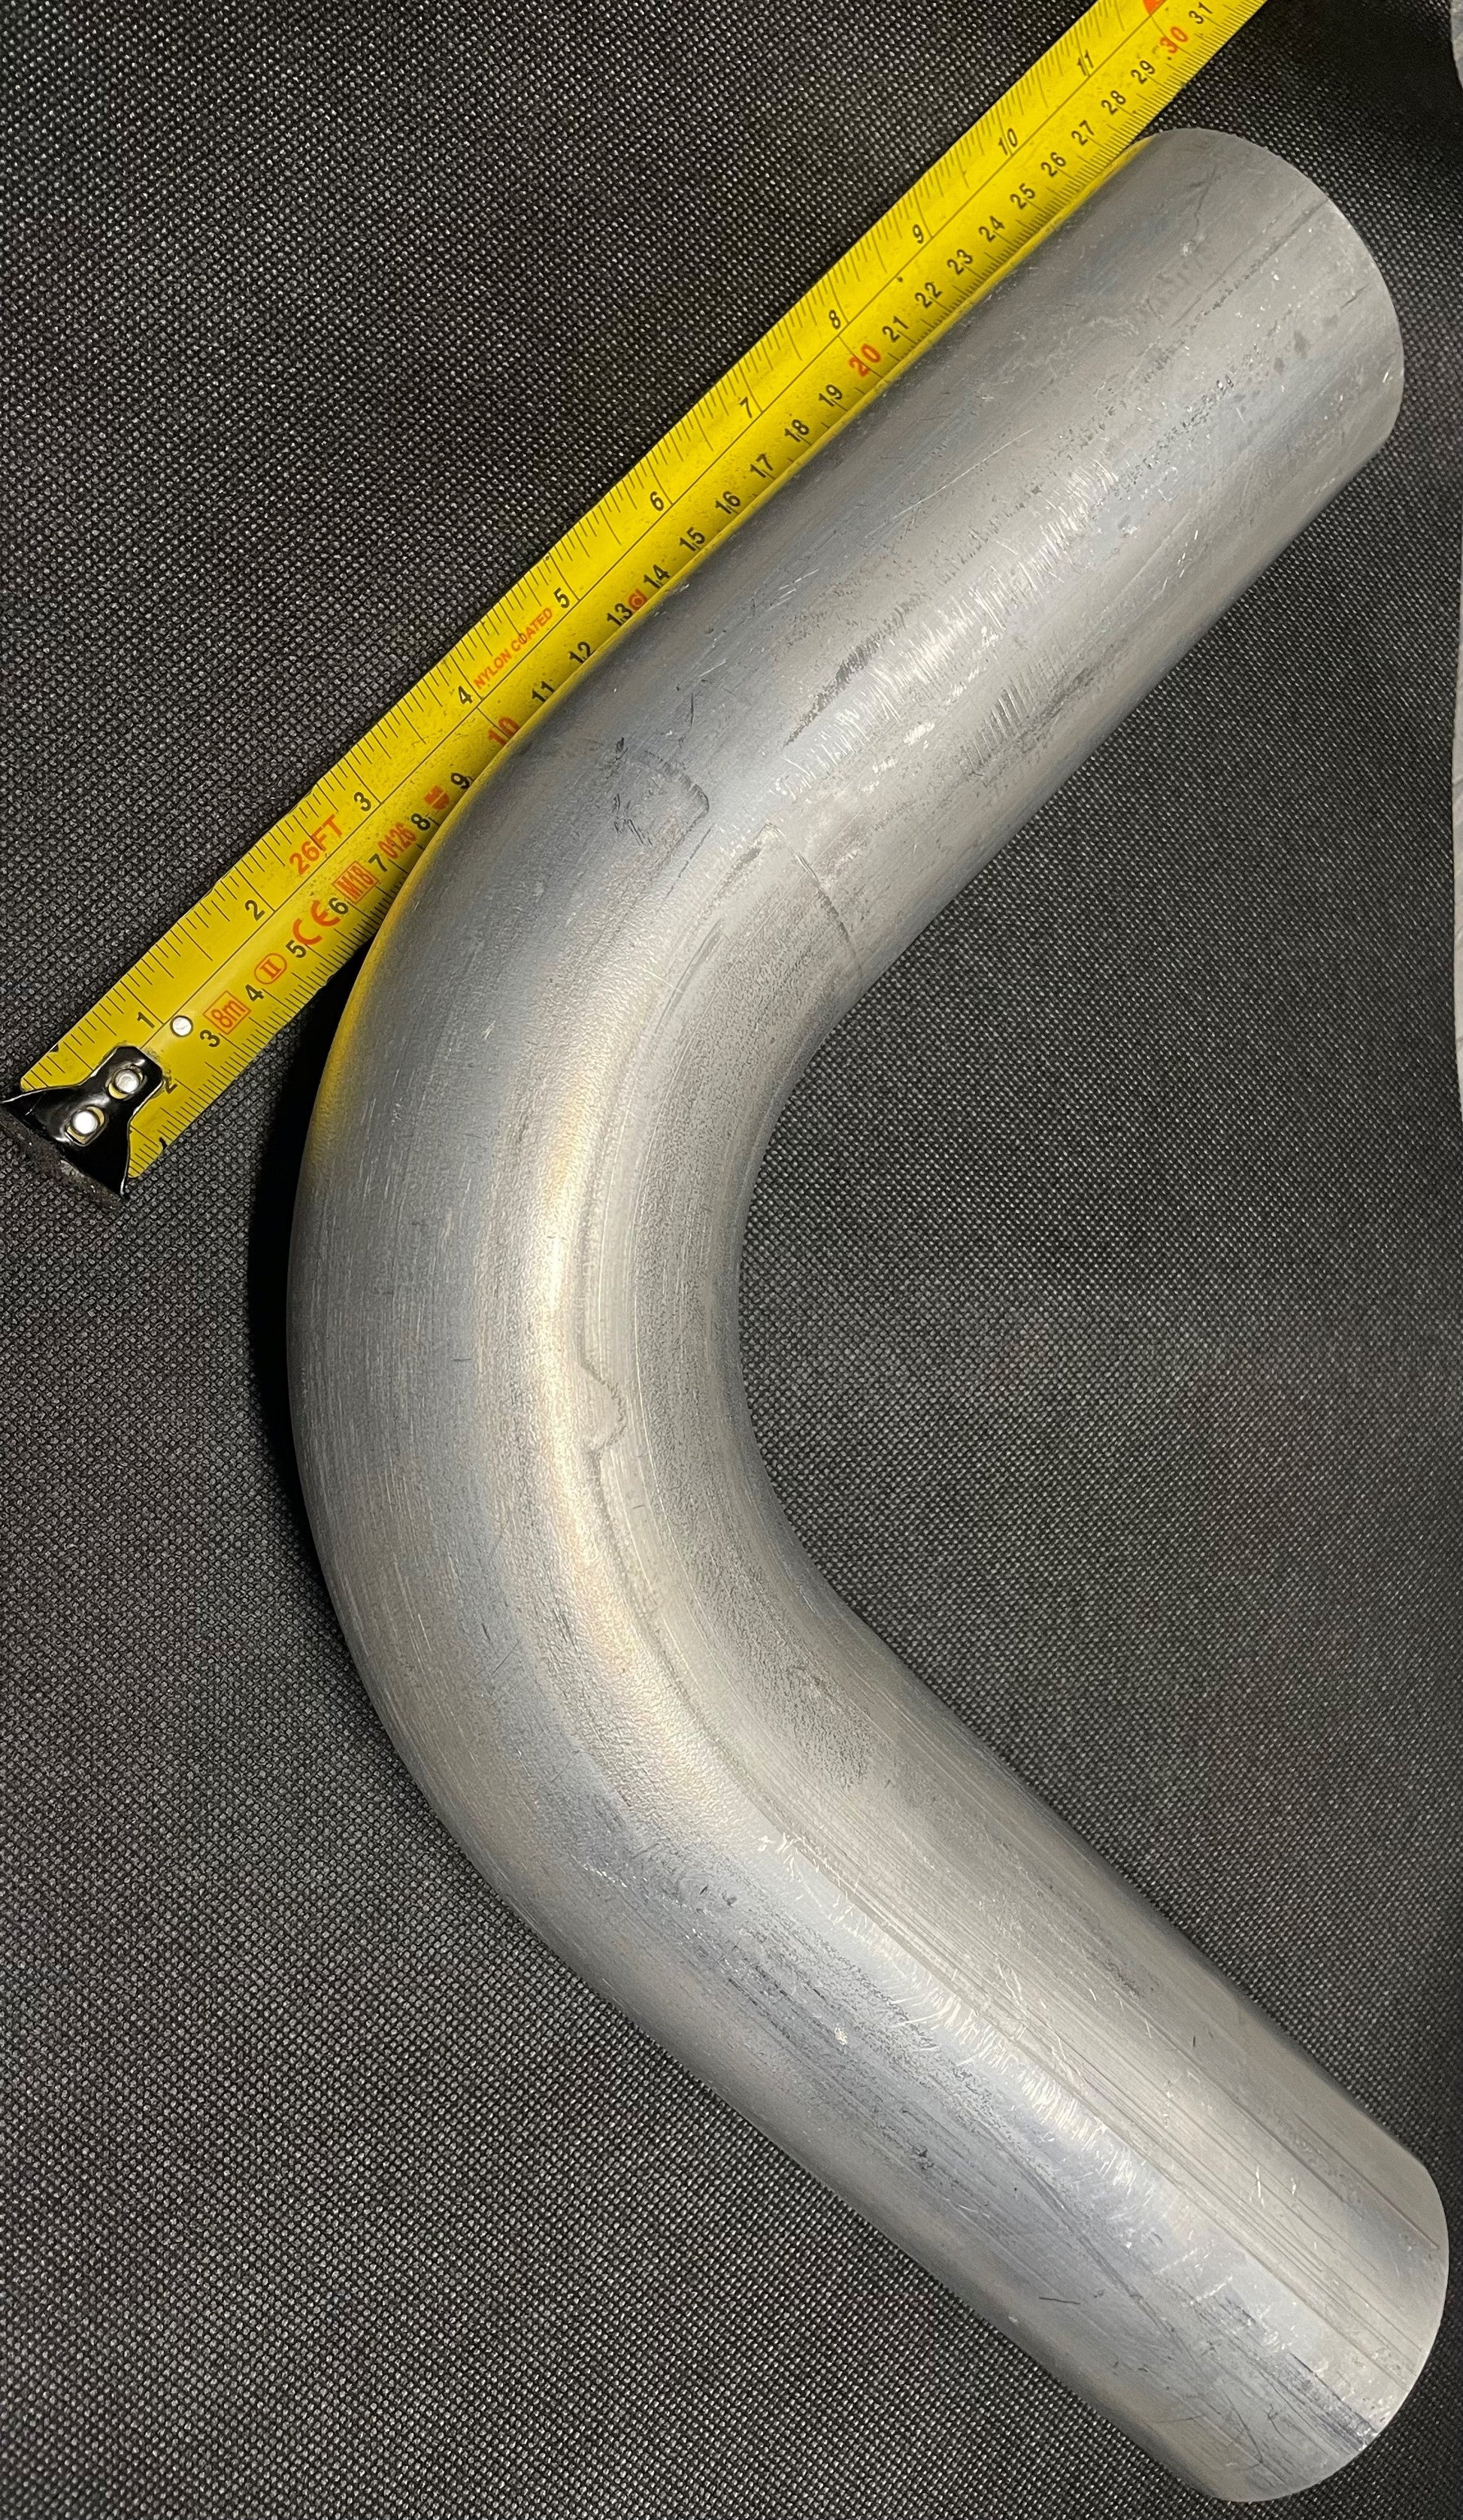 tape measure shows 250mm from bend to end of aluminium